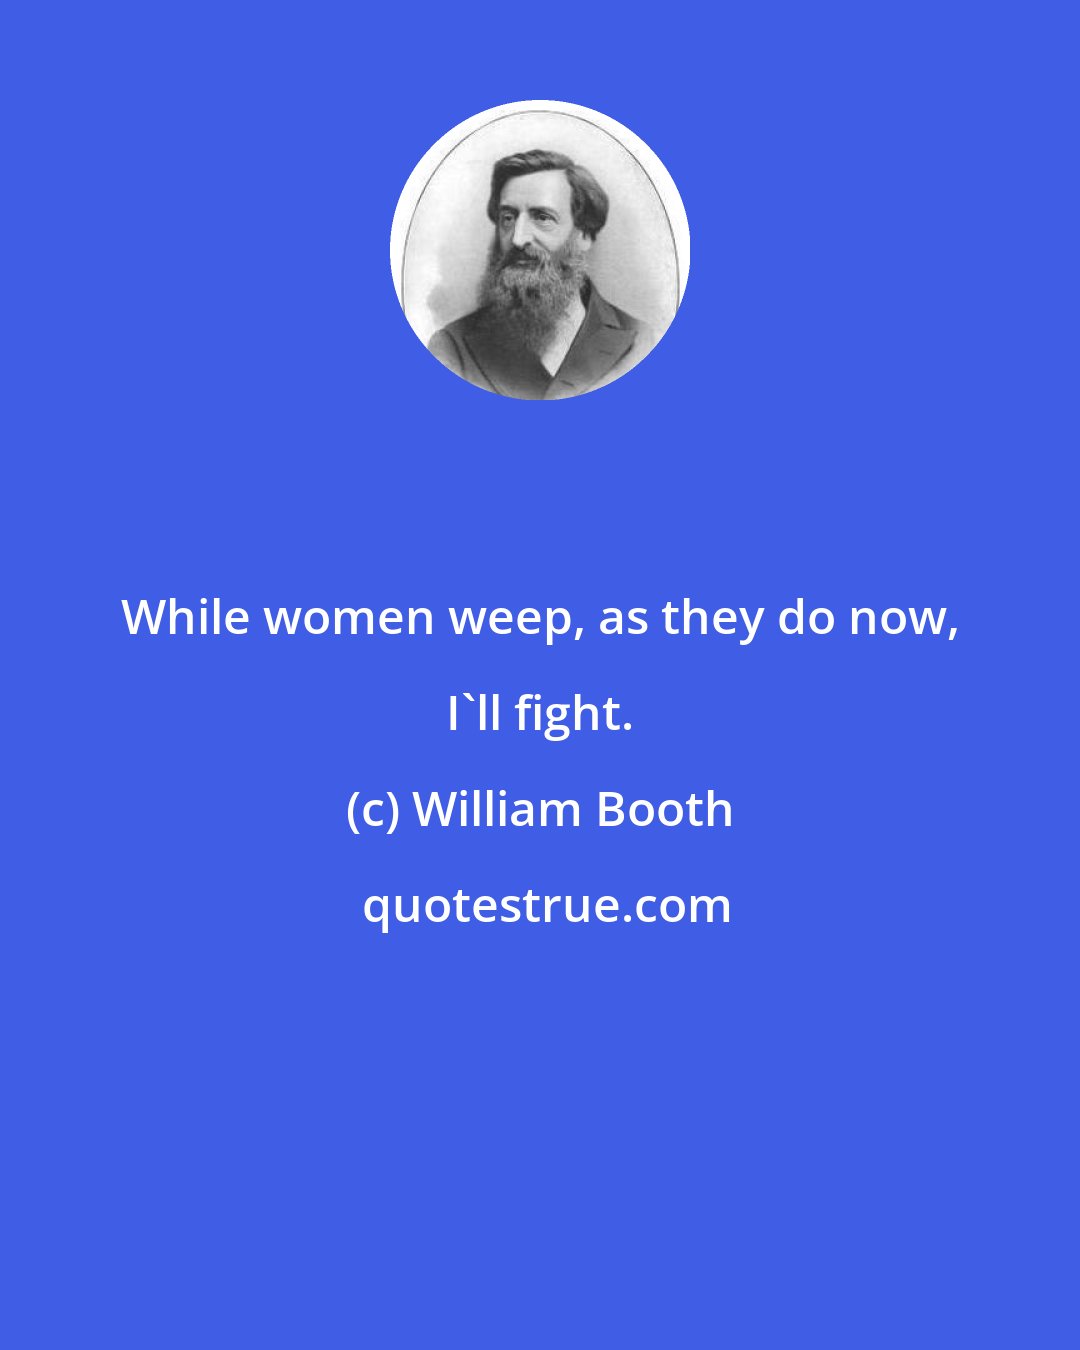 William Booth: While women weep, as they do now, I'll fight.